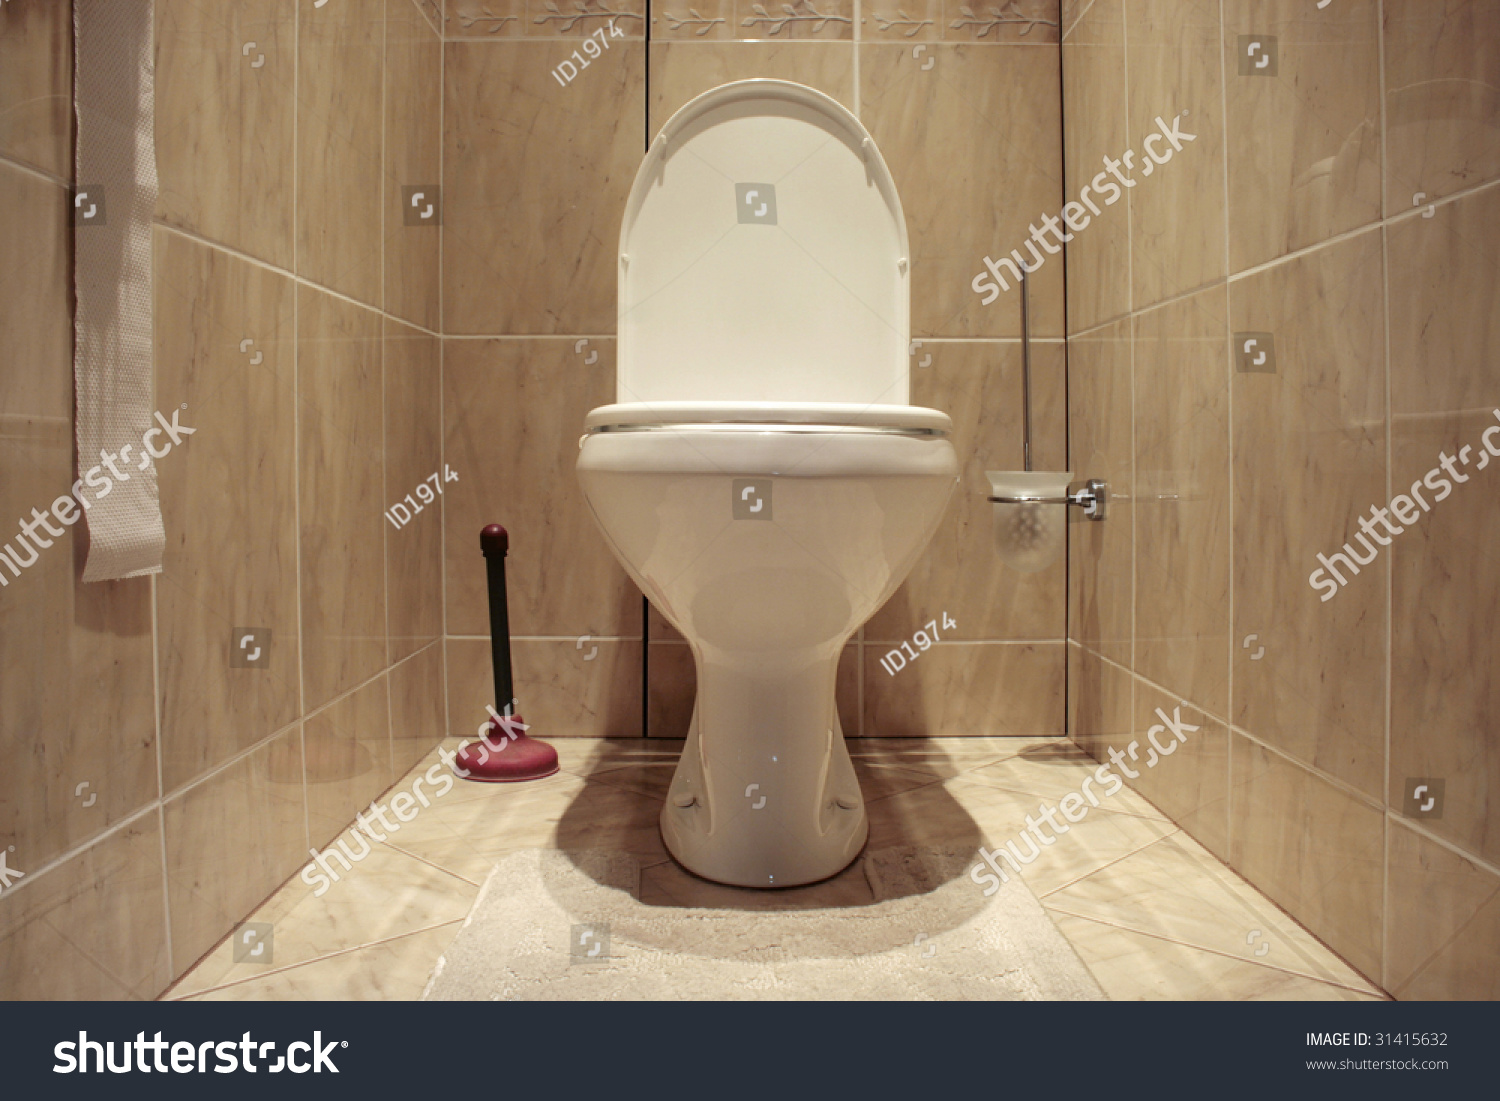 Professional Plumber Holding Plunger Near Toilet Bowl In 